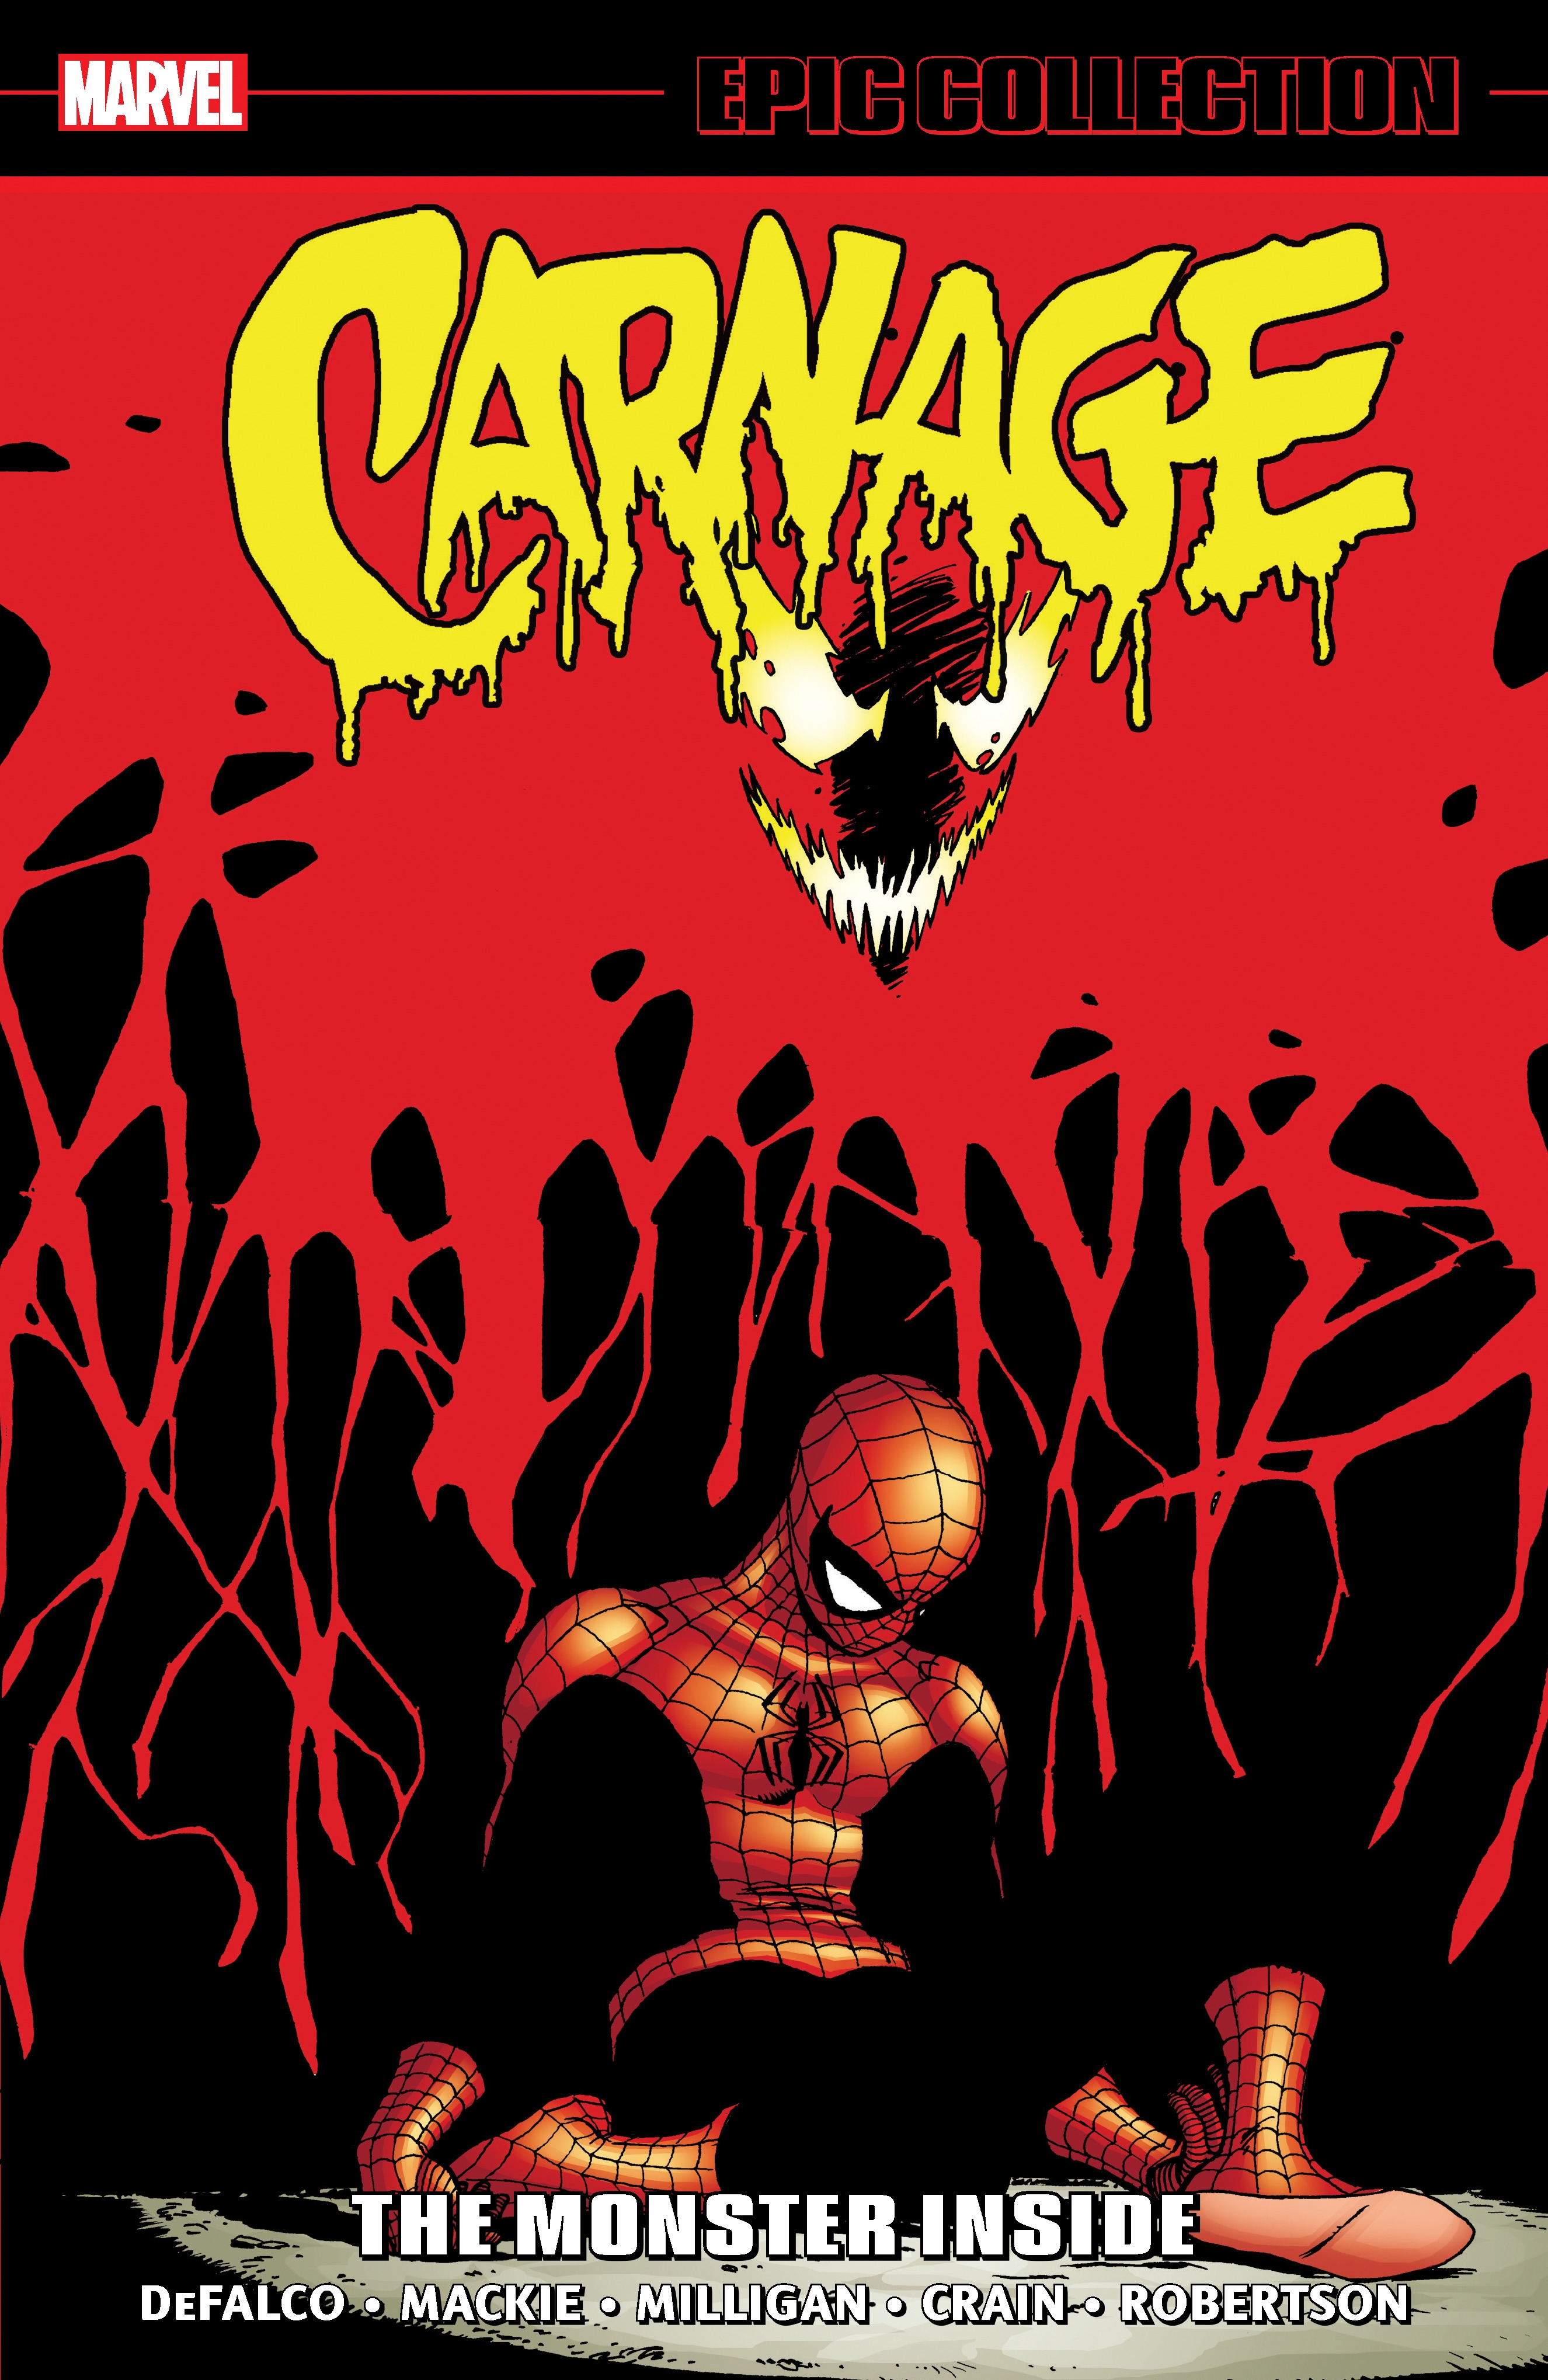 CARNAGE EPIC COLLECTION: THE MONSTER INSIDE by Marvel Various